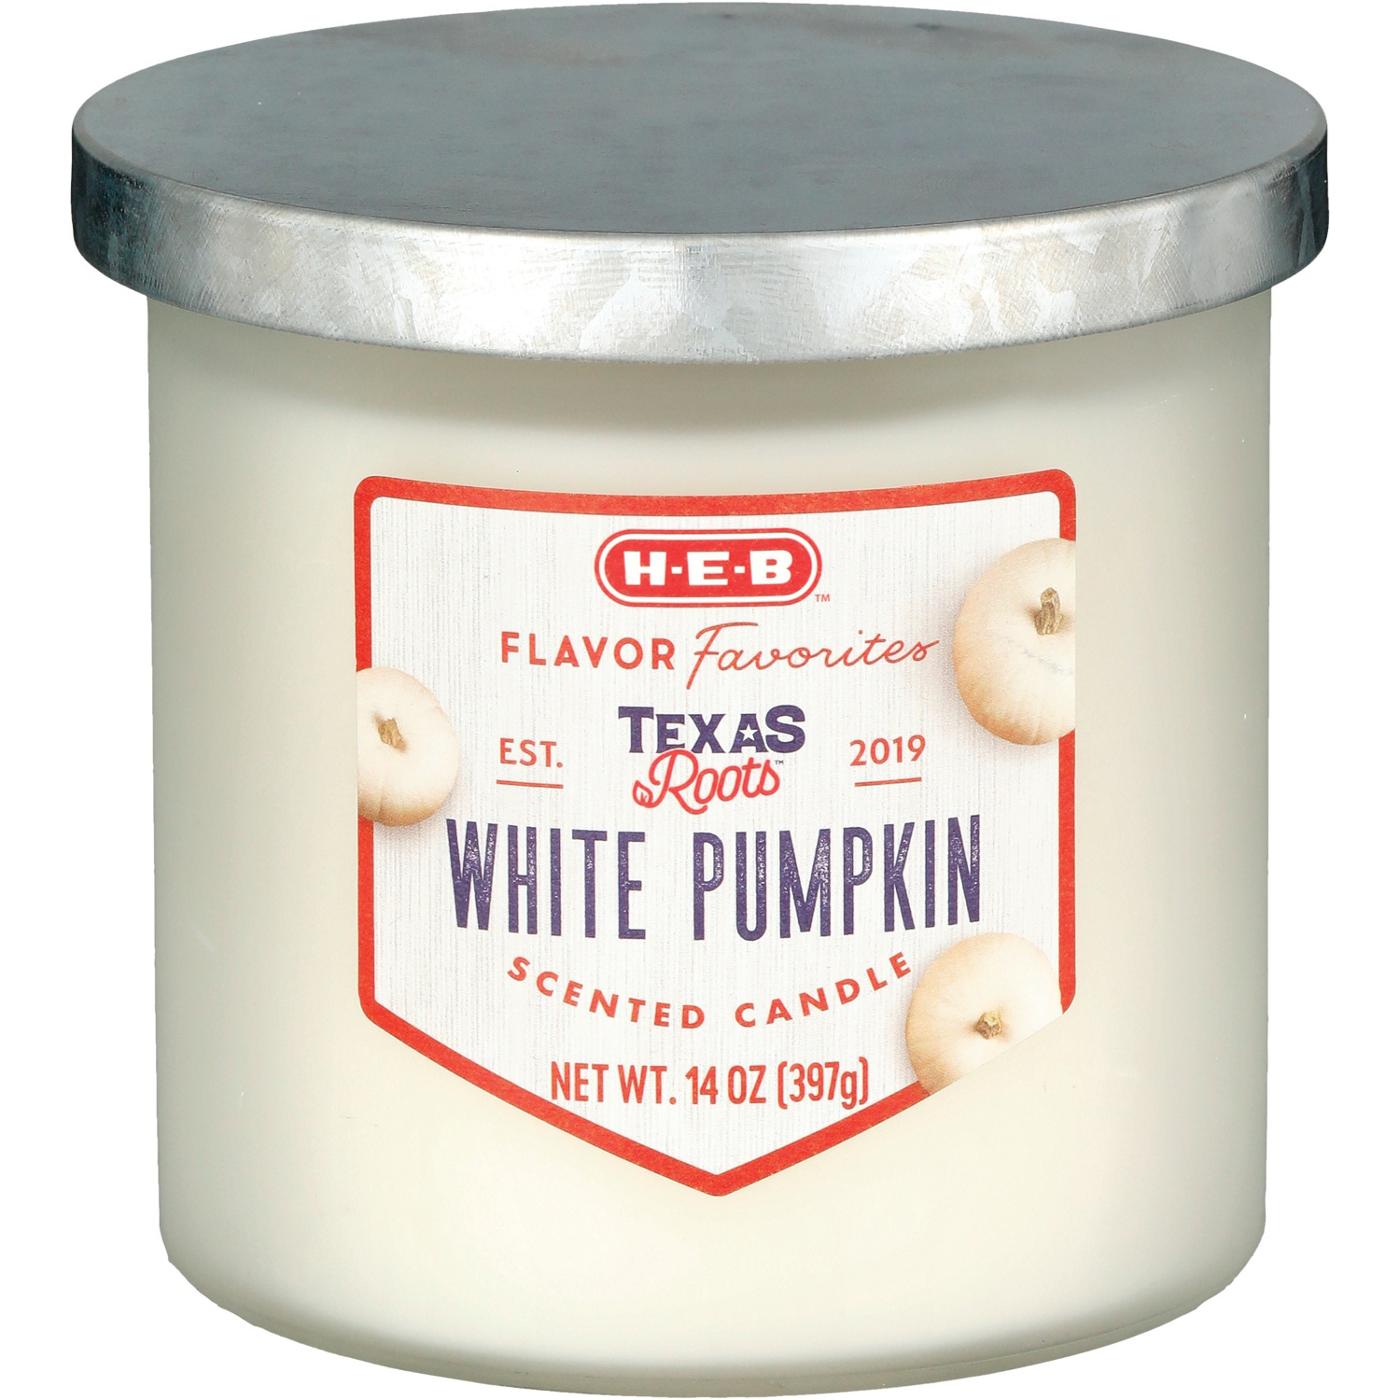 H-E-B Flavor Favorites Texas Roots White Pumpkin Scented Candle; image 2 of 2